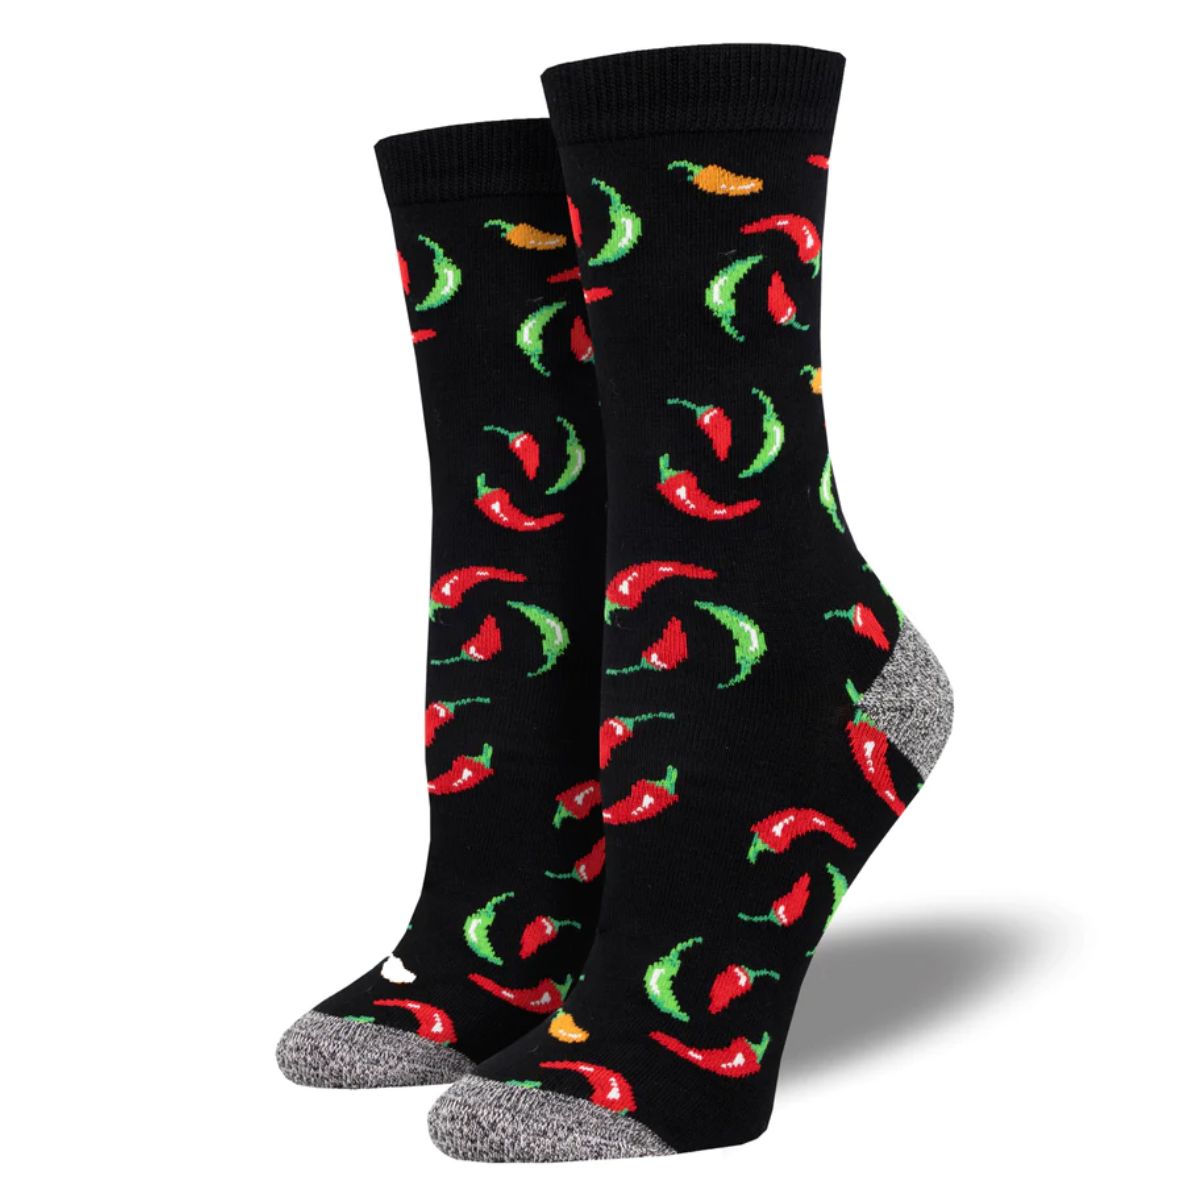 Hot on your heels socks a pair of black crew socks with hot pepper print